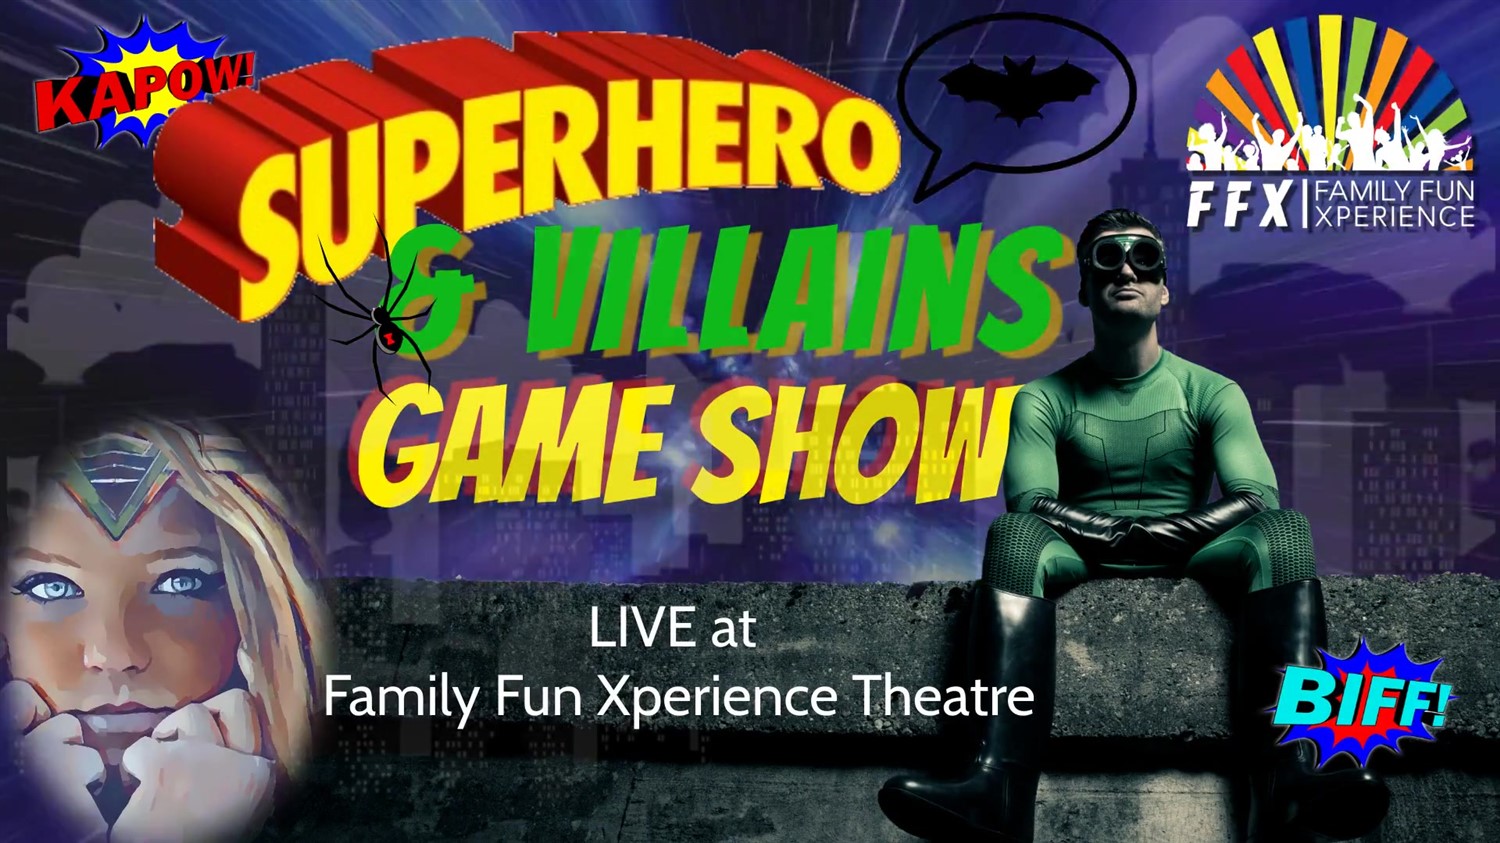 Superheroes & Villains Live Game Show FAMILY-POWERED SUPER FUN on Apr 15, 19:00@FFX Theatre - Pick a seat, Buy tickets and Get information on Family Fun Xperience tickets.ffxshow.org